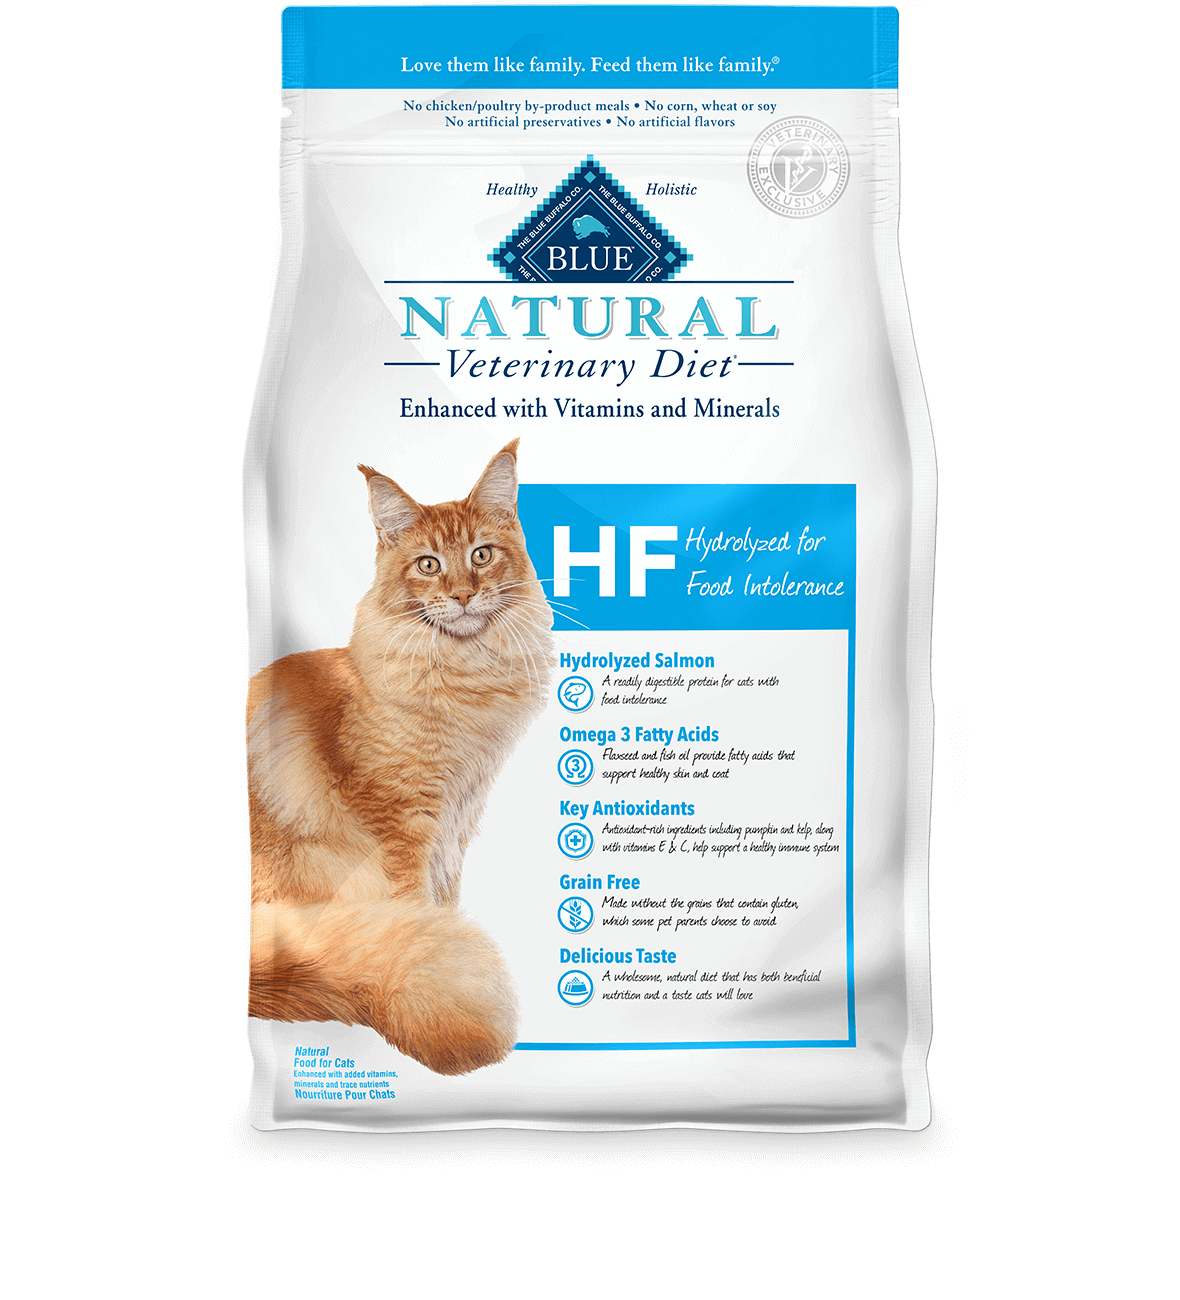 blue natural veterinary diet hf hydrolyzed for food intolerance cat dry food